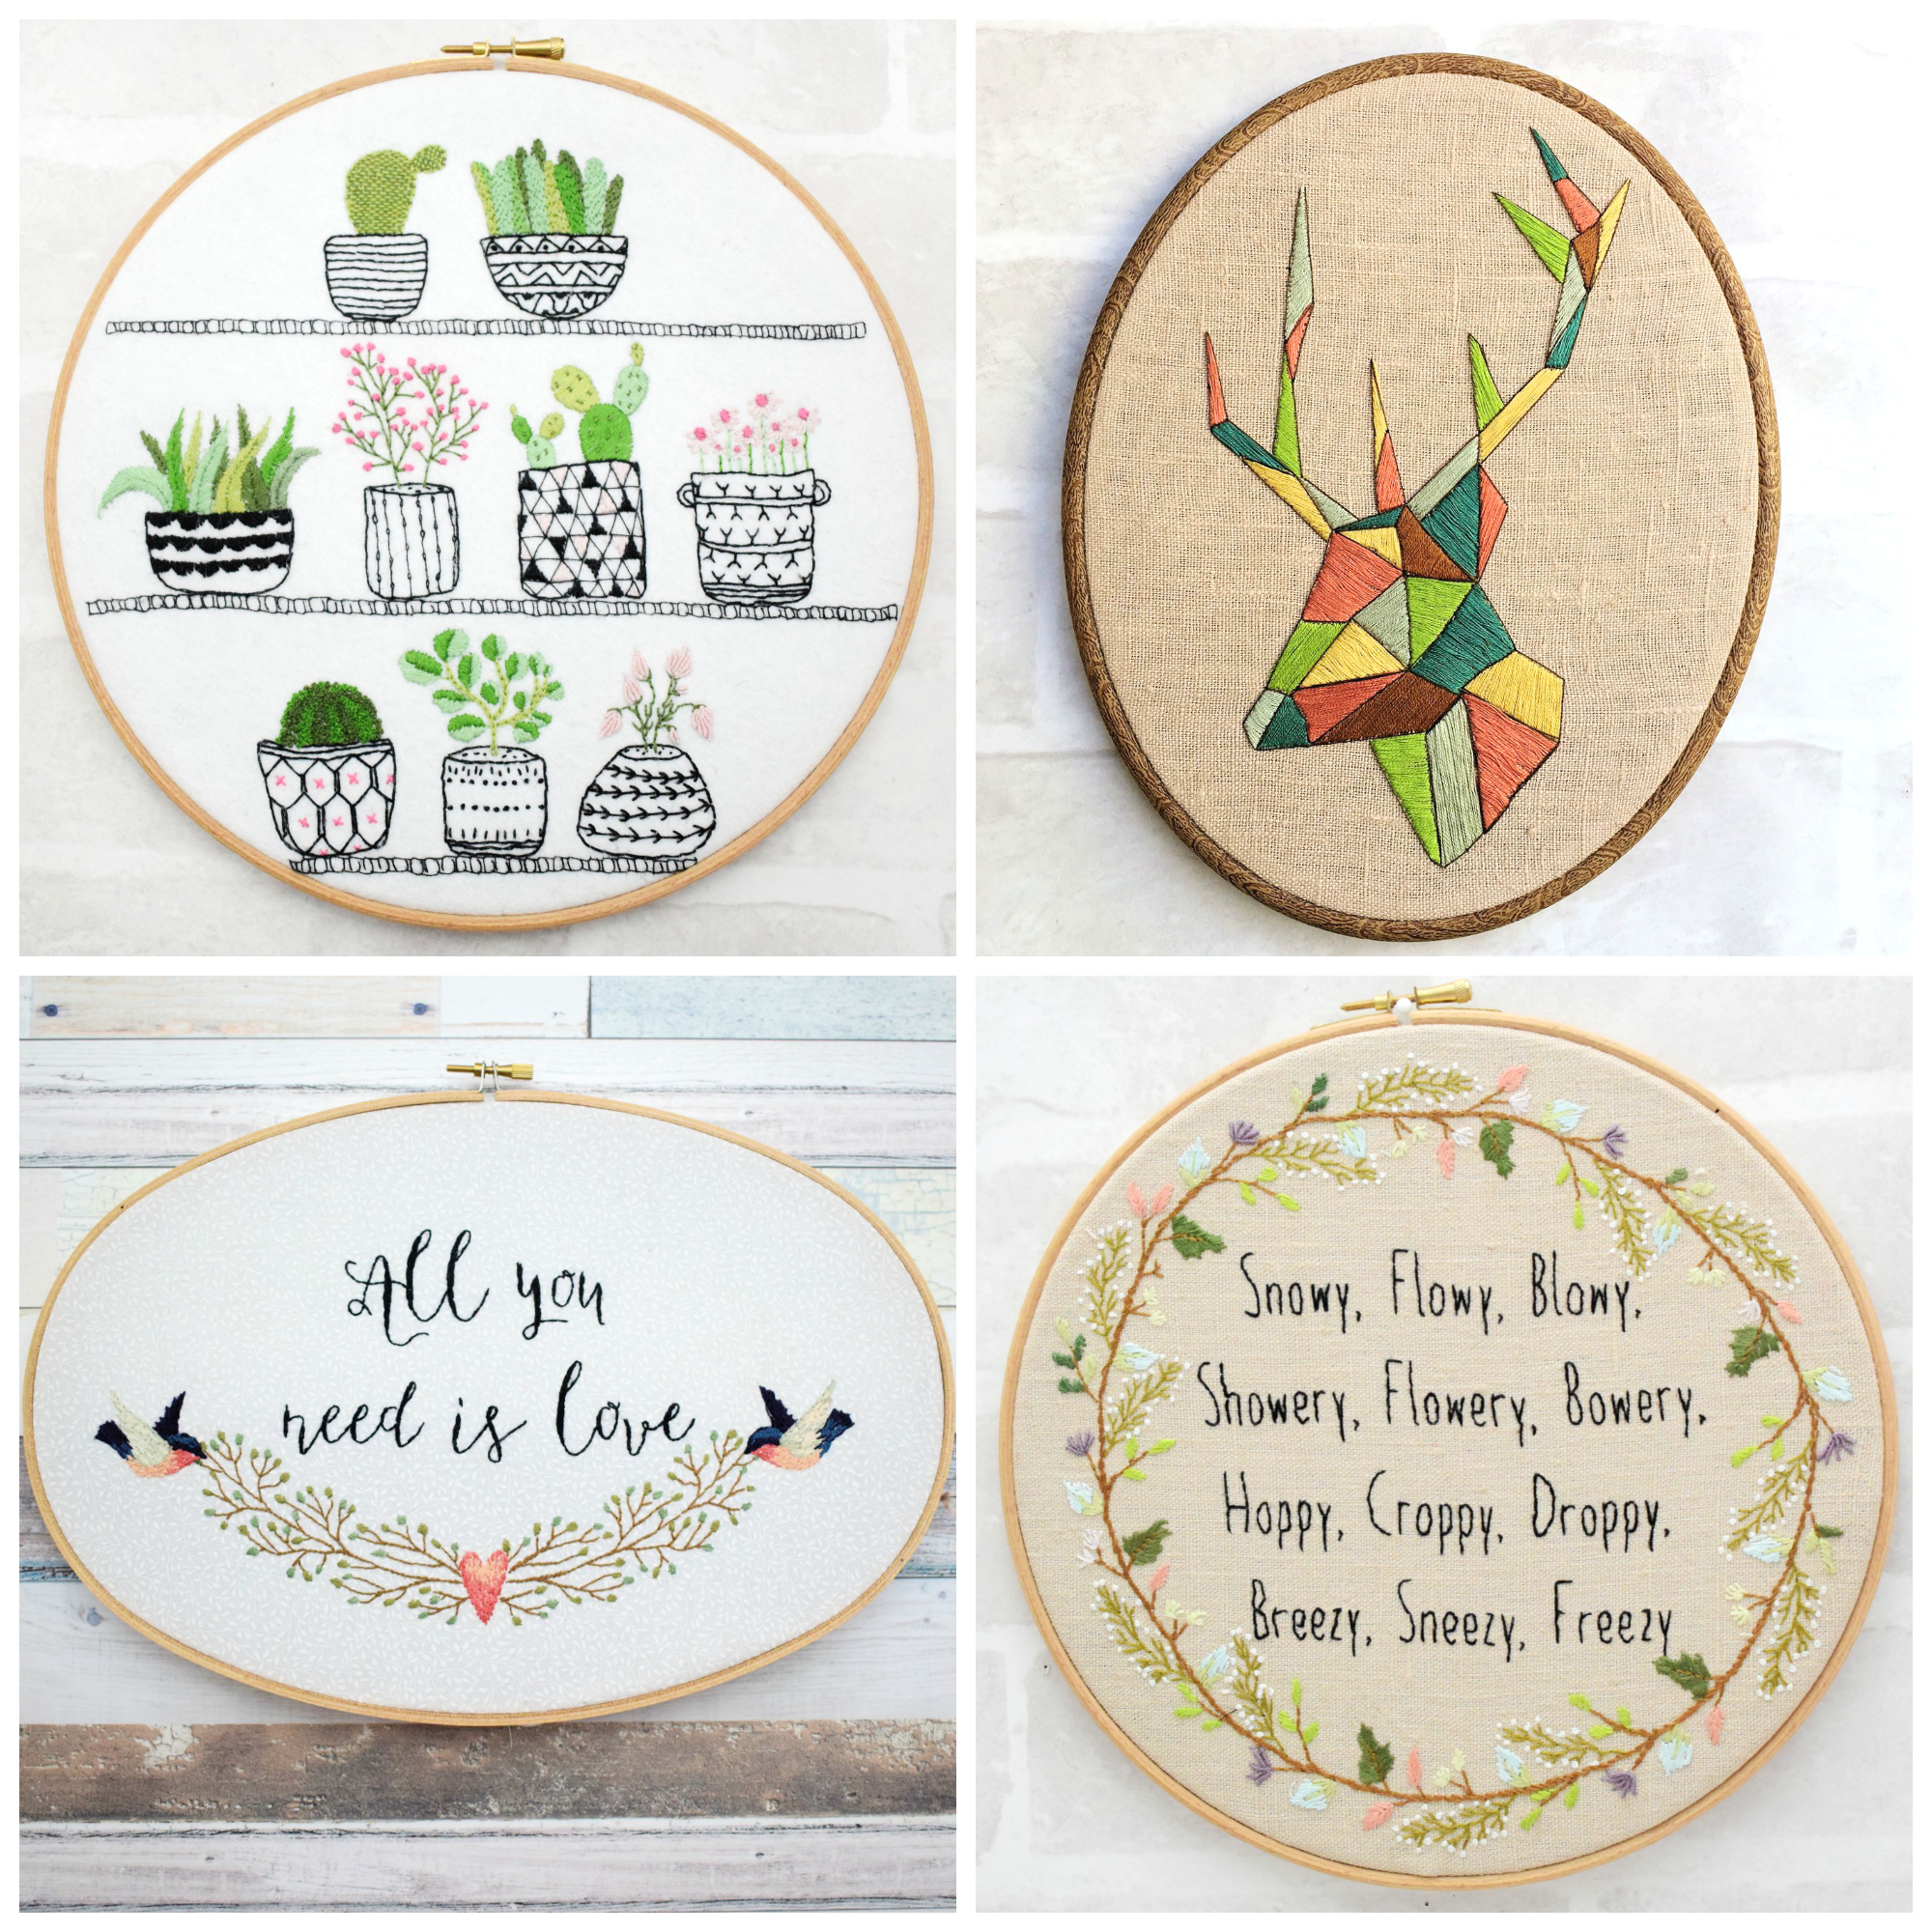 Embroidery by Bustle & Sew